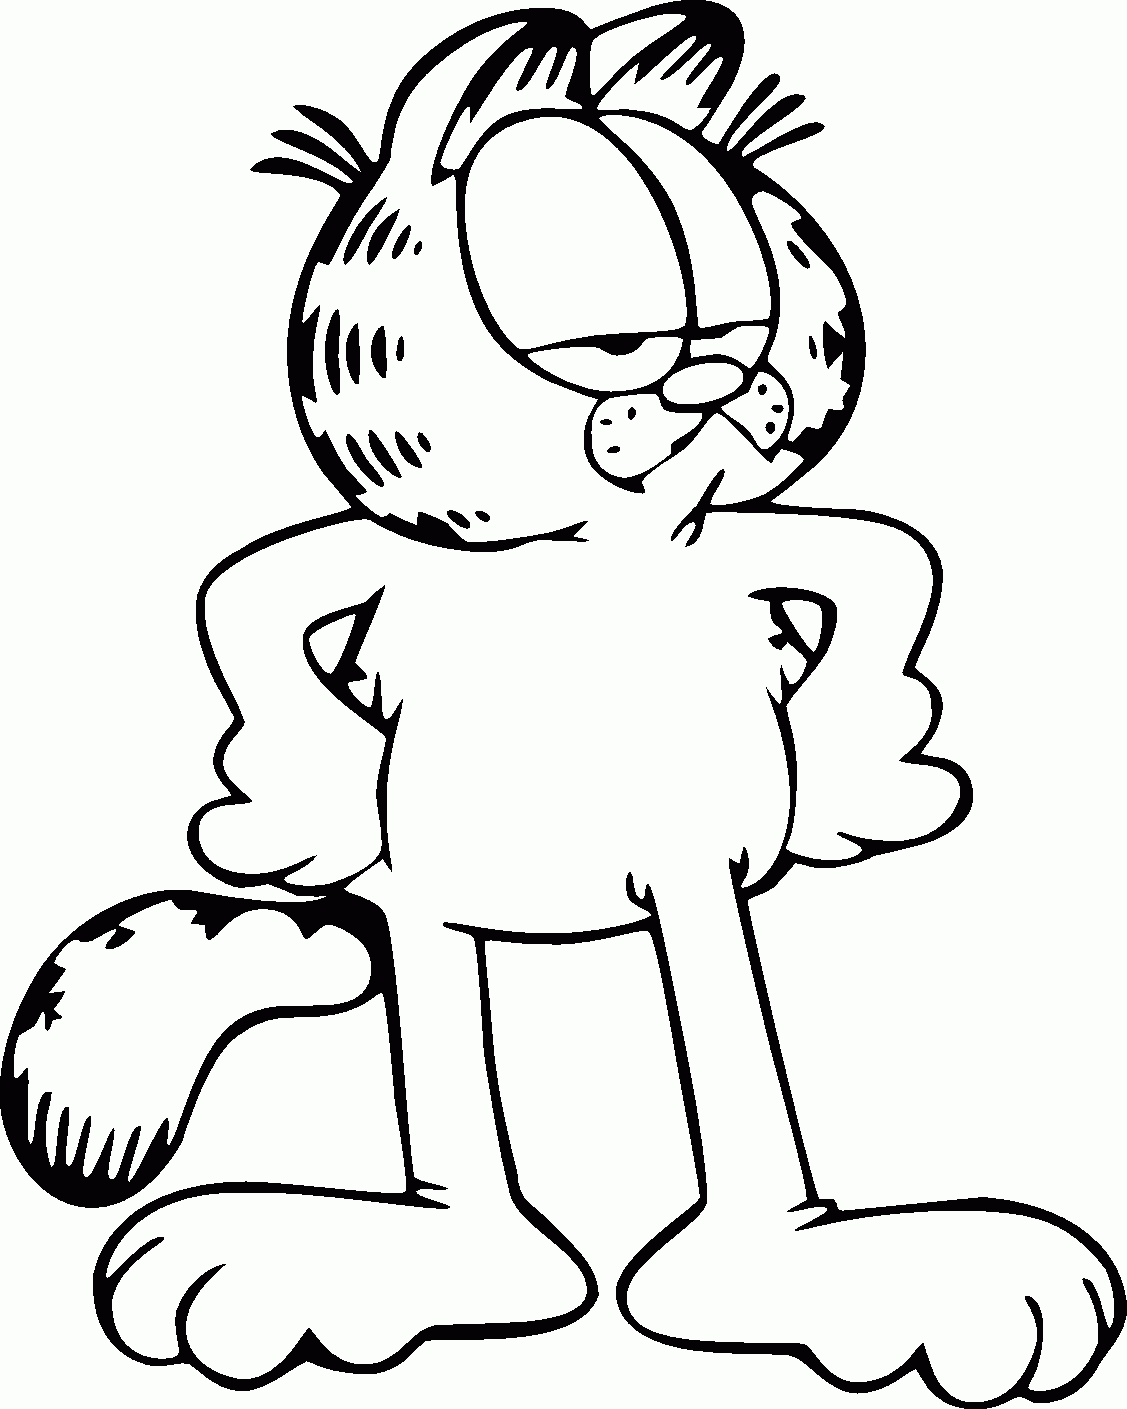 Animal Garfield Cartoon Coloring Pages 